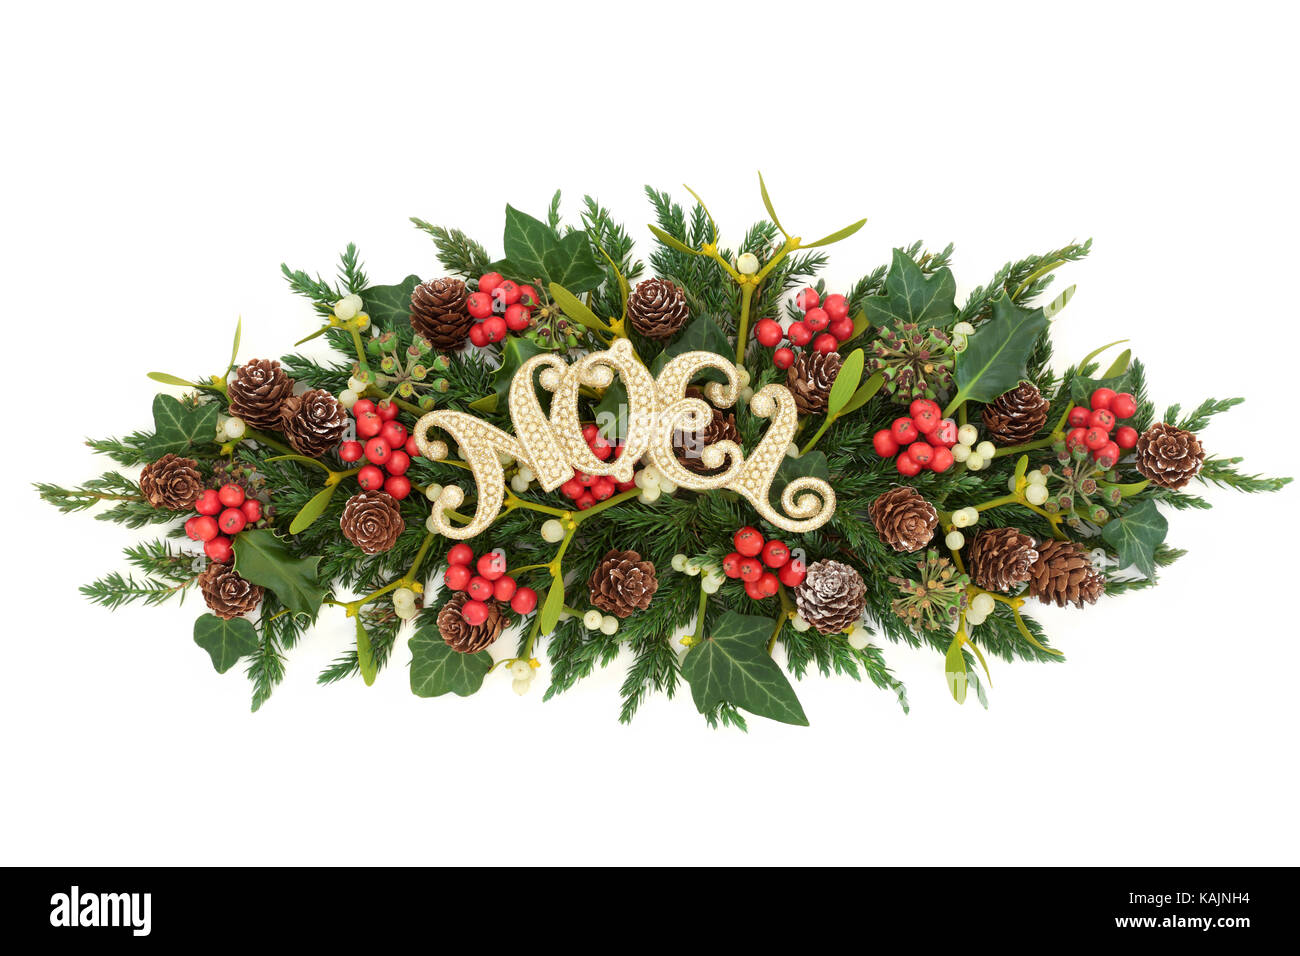 Christmas decoration with gold noel sign, holly, ivy, mistletoe, fir and pine cones on white background. Stock Photo